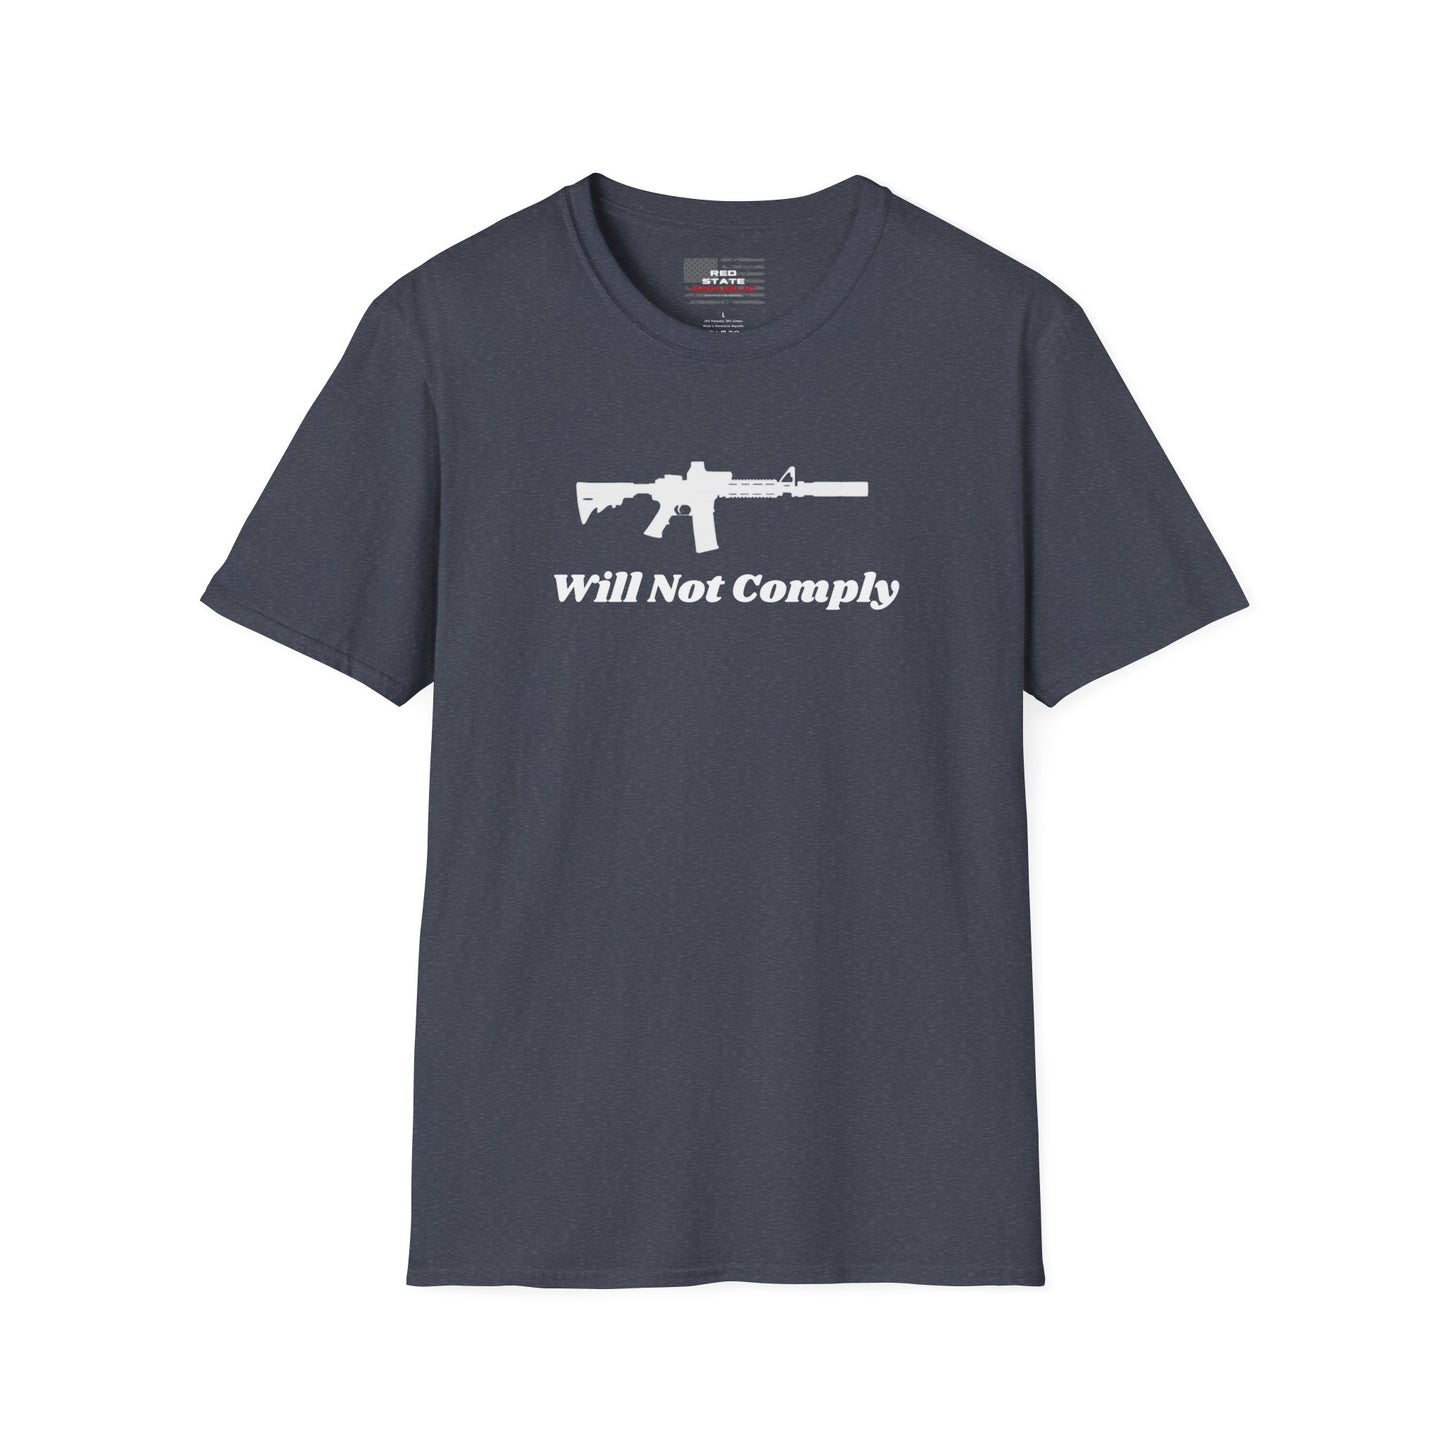 Will not Comply Tee